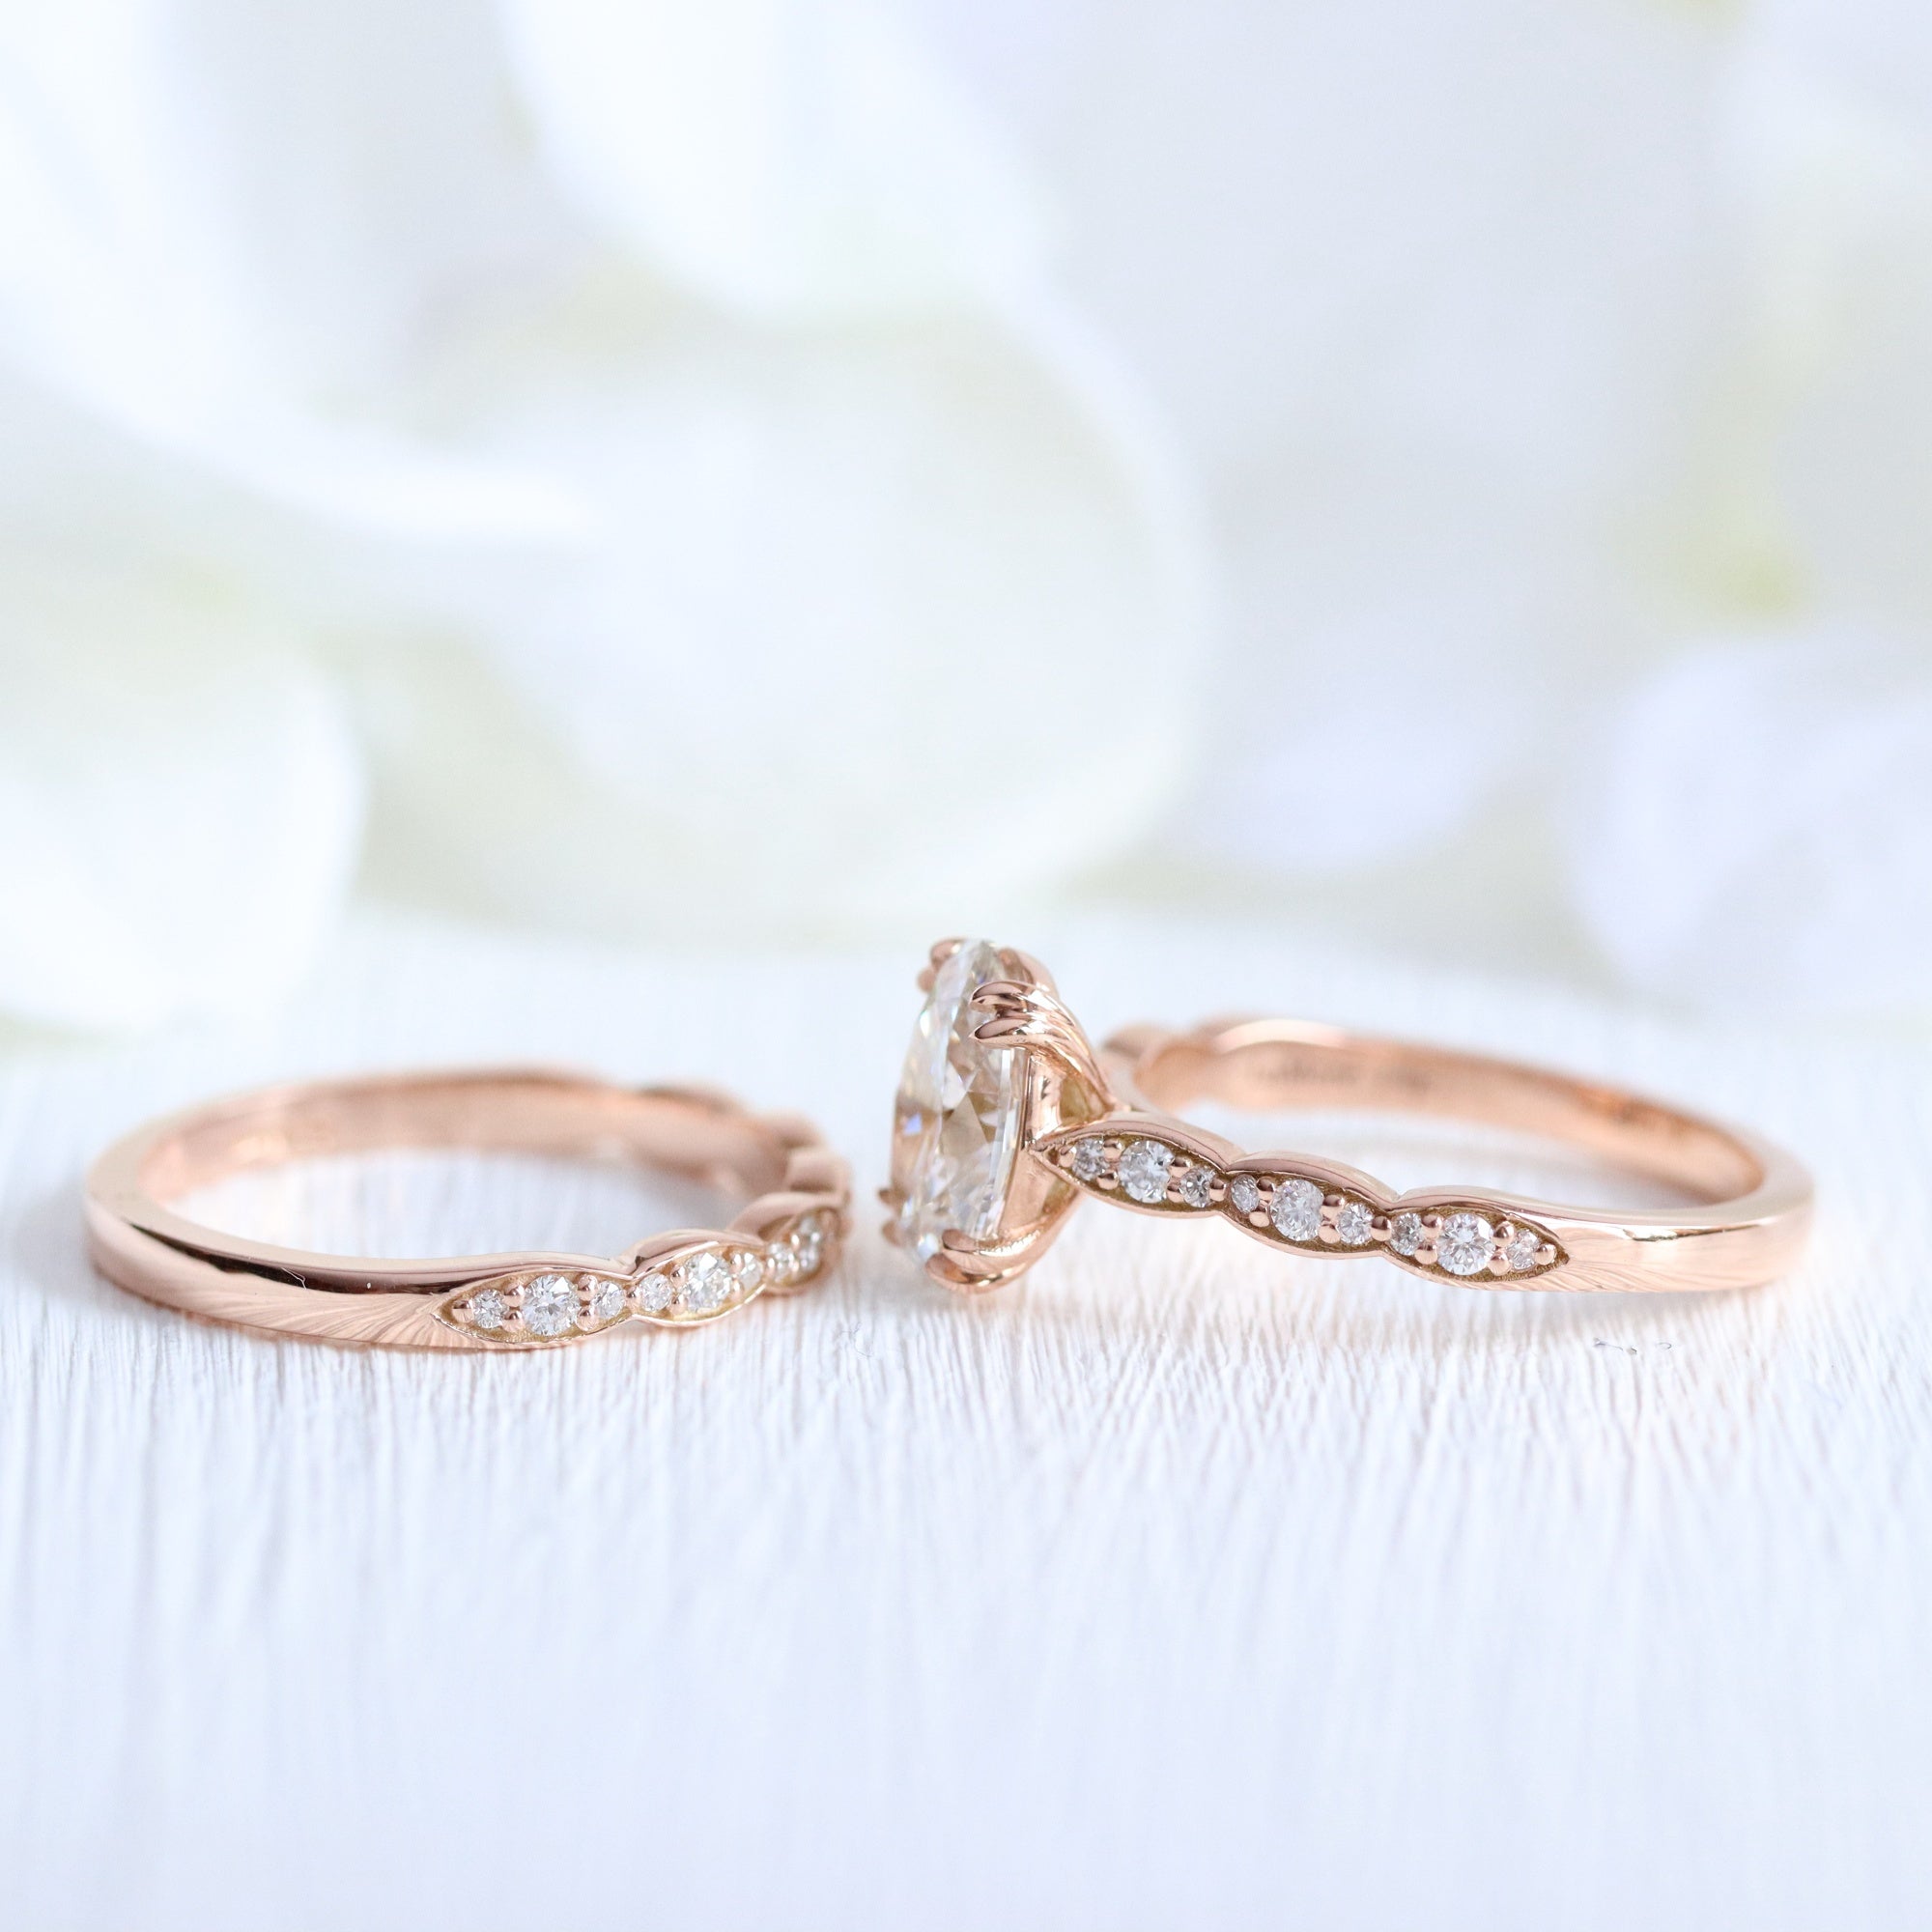 lab diamond ring bridal set rose gold oval diamond solitaire engagement ring La More Design Jewelry